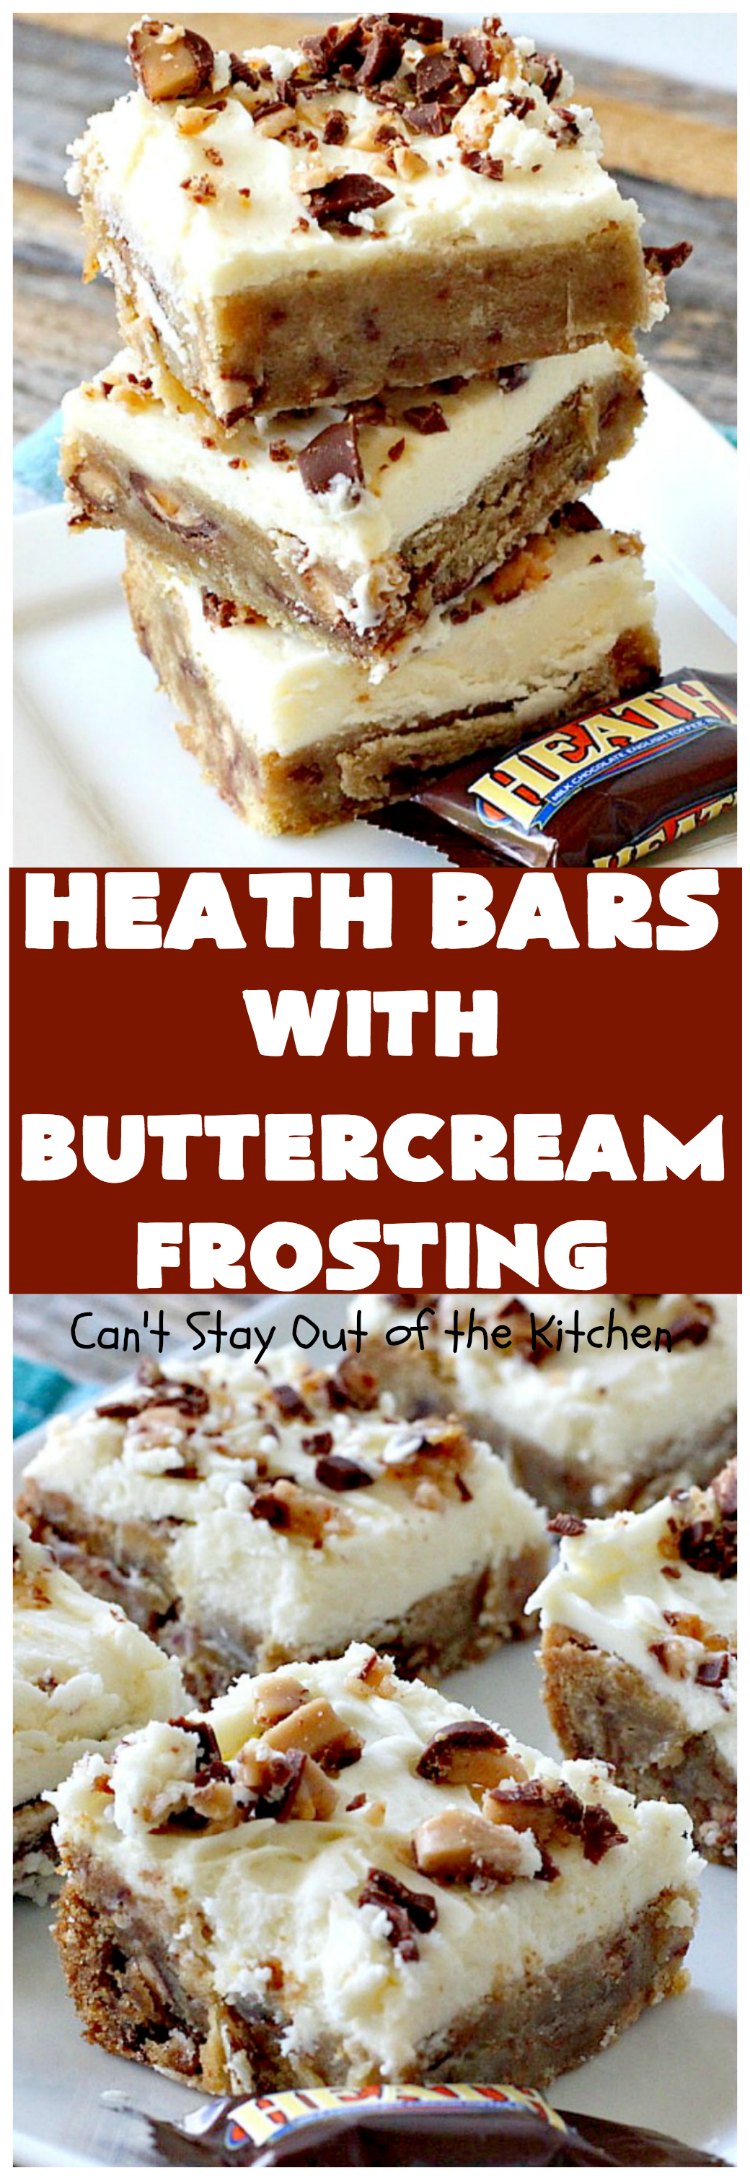 Heath Bars with Buttercream Frosting | Can't Stay Out of the Kitchen